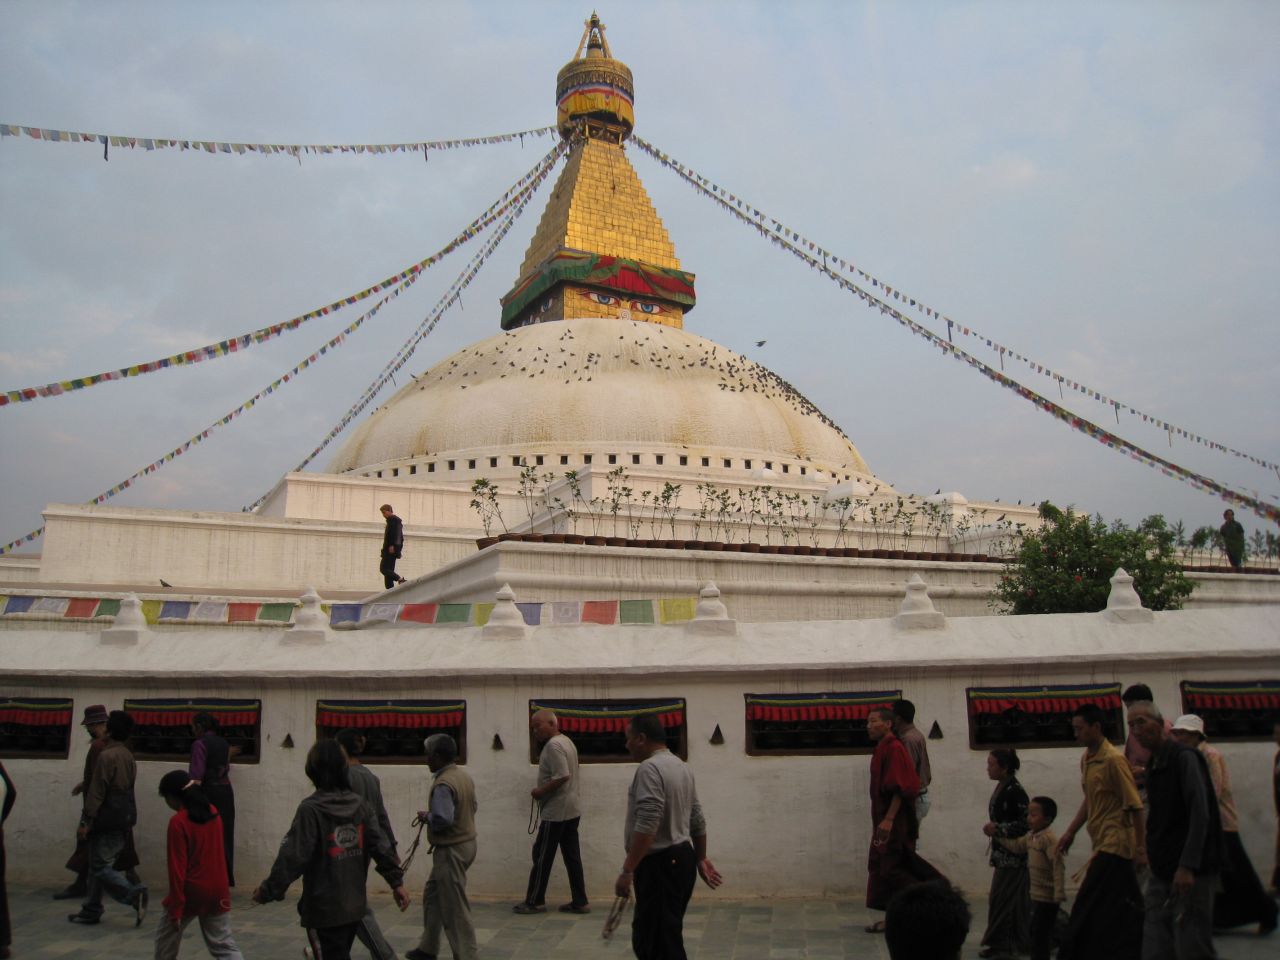 Tibetans walk clockwise around the stupa at sunset (note the malas they hold in their hands)